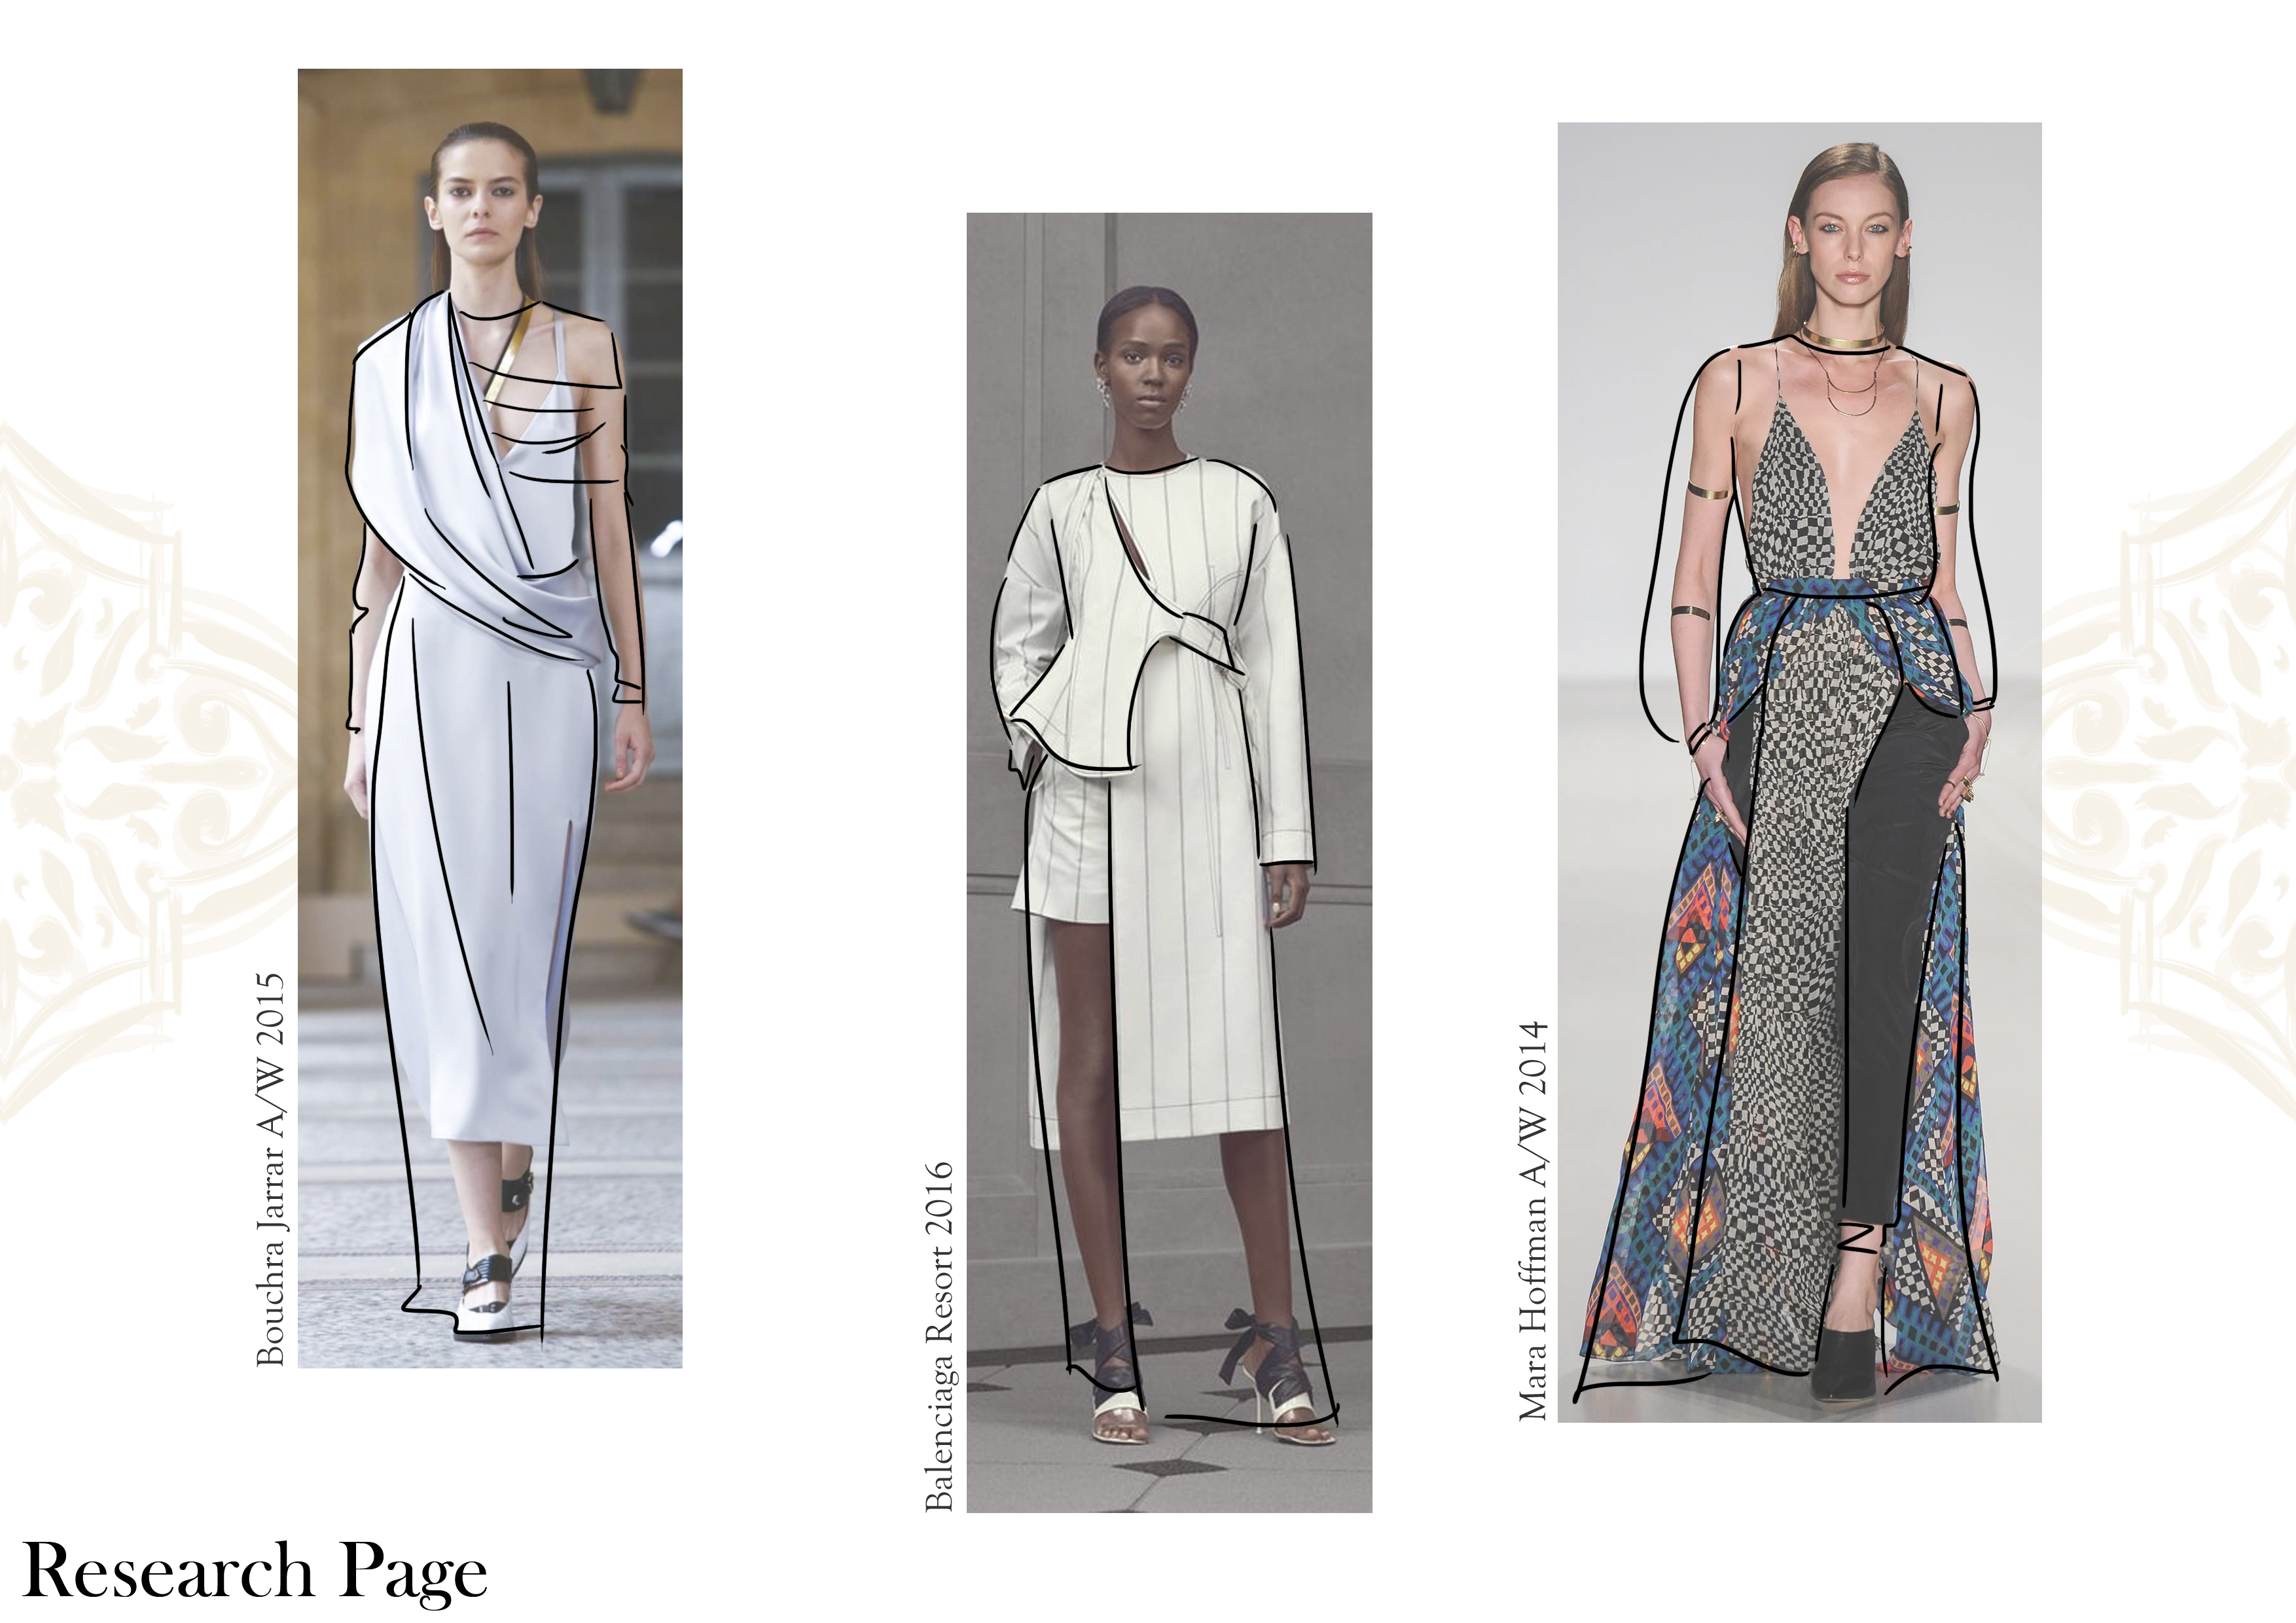 Bouchra Jarrar A/W 2015

 

<1

p—

oO

ol

© <

oO a

ol <

- £

¢ =

= ~~

g Ss
co
=
=

 

Research Page